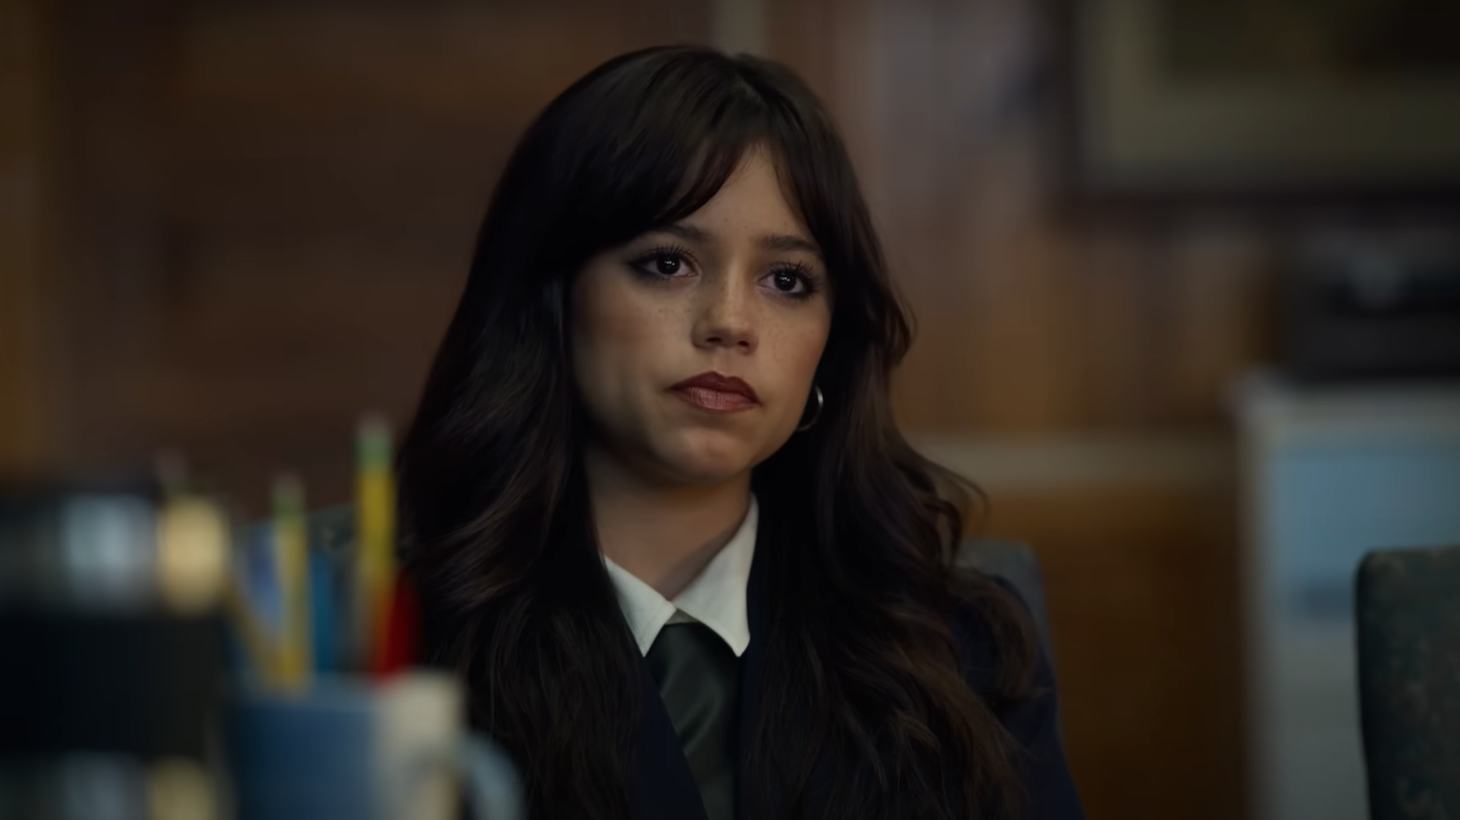 In “Miller’s Girl,” Jenna Ortega plays a gifted, Gothic, 18-year-old student who lives in a small Tennessee town with mostly absent parents.